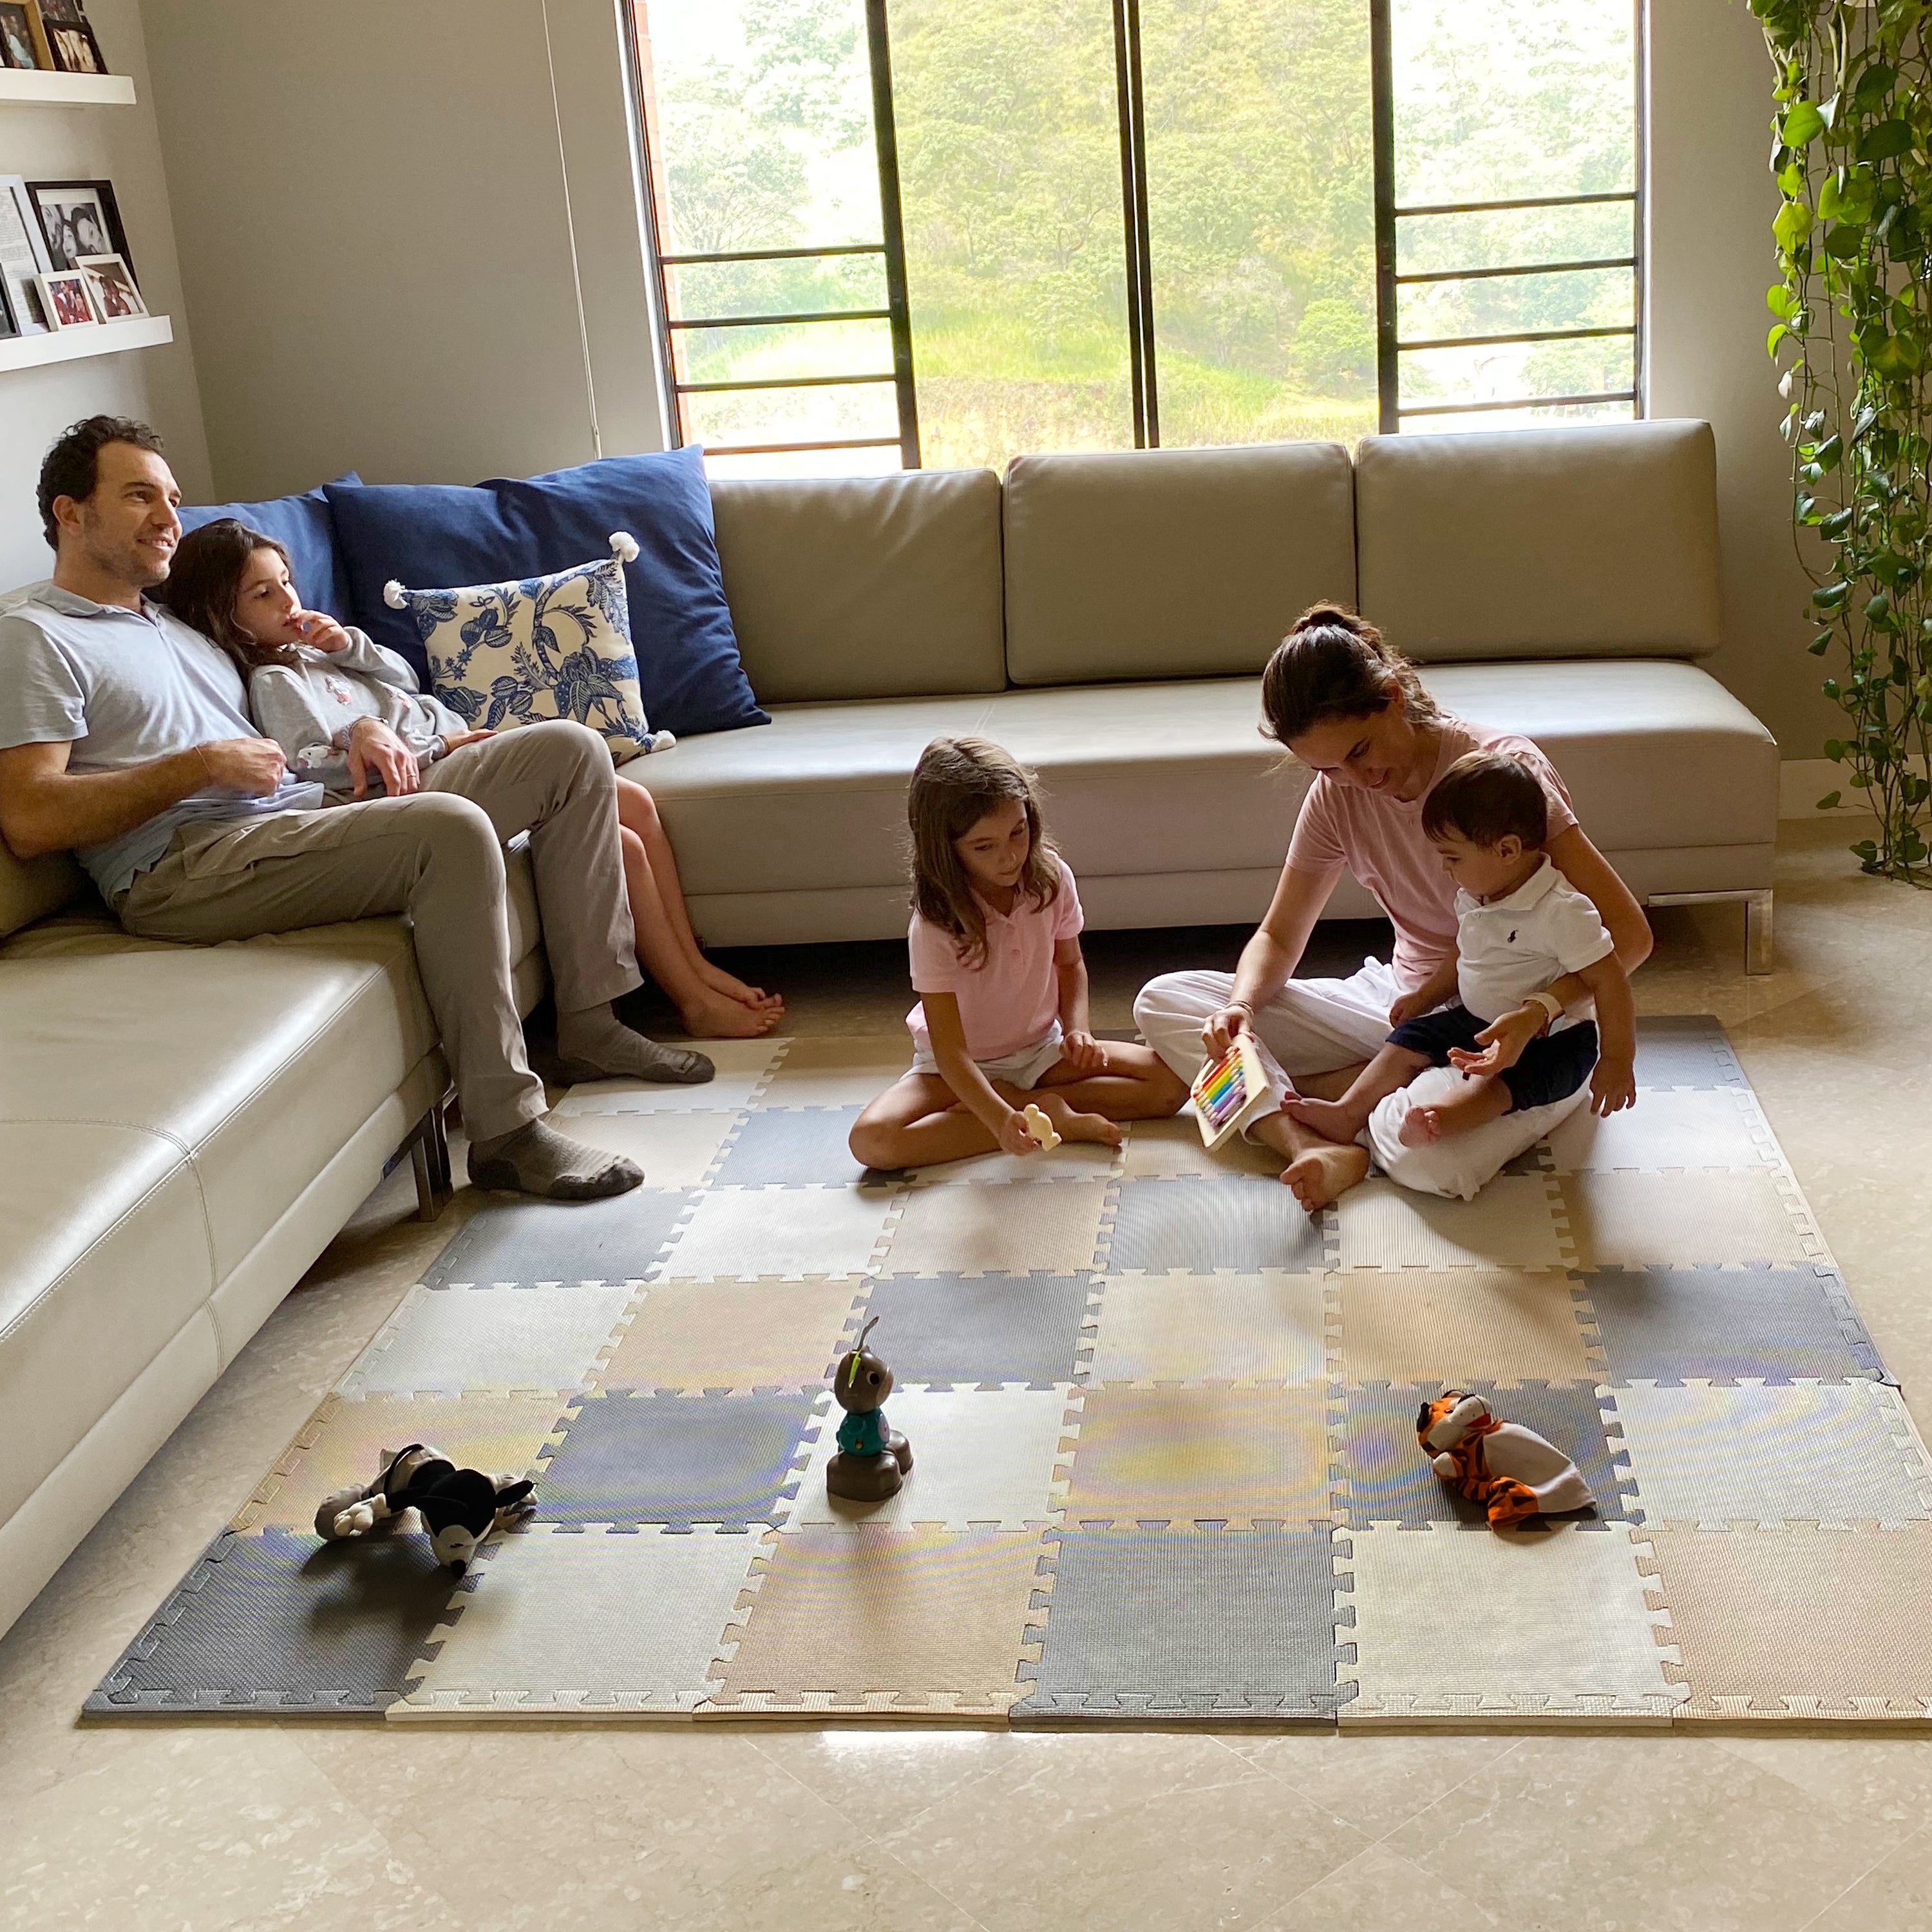 Soft Non-Toxic Puzzle Play Mats